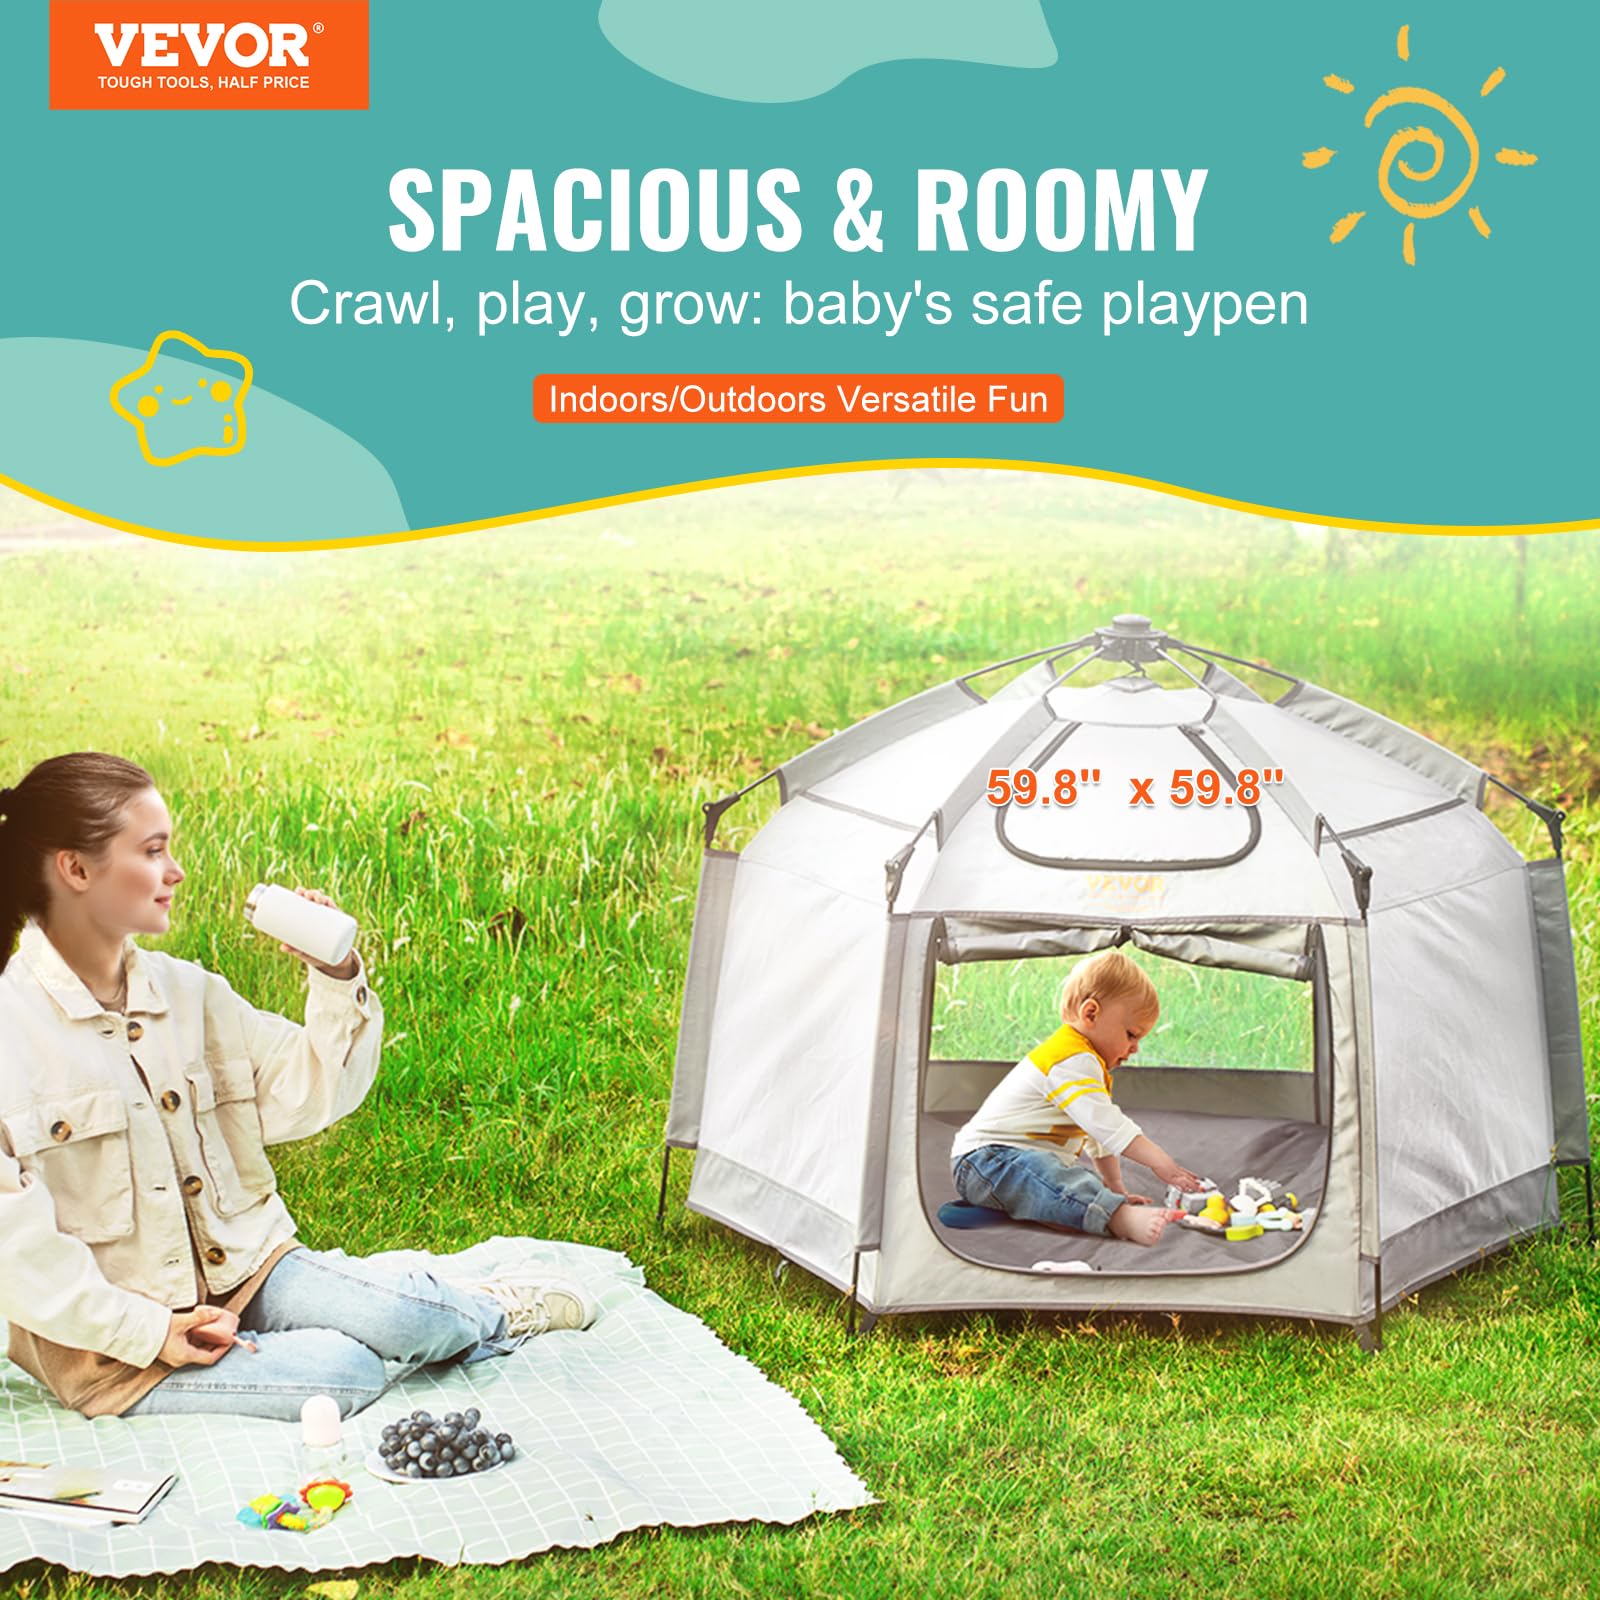 VEVOR Baby Playpen with Canopy, Indoor/Outdoor Portable Playpen for Babies and Toddler, Lightweight & Foldable, Pop Up Toddler Play Yard with 3 Sun-Shades & Travel Bag for Park Beach Home, 59.8